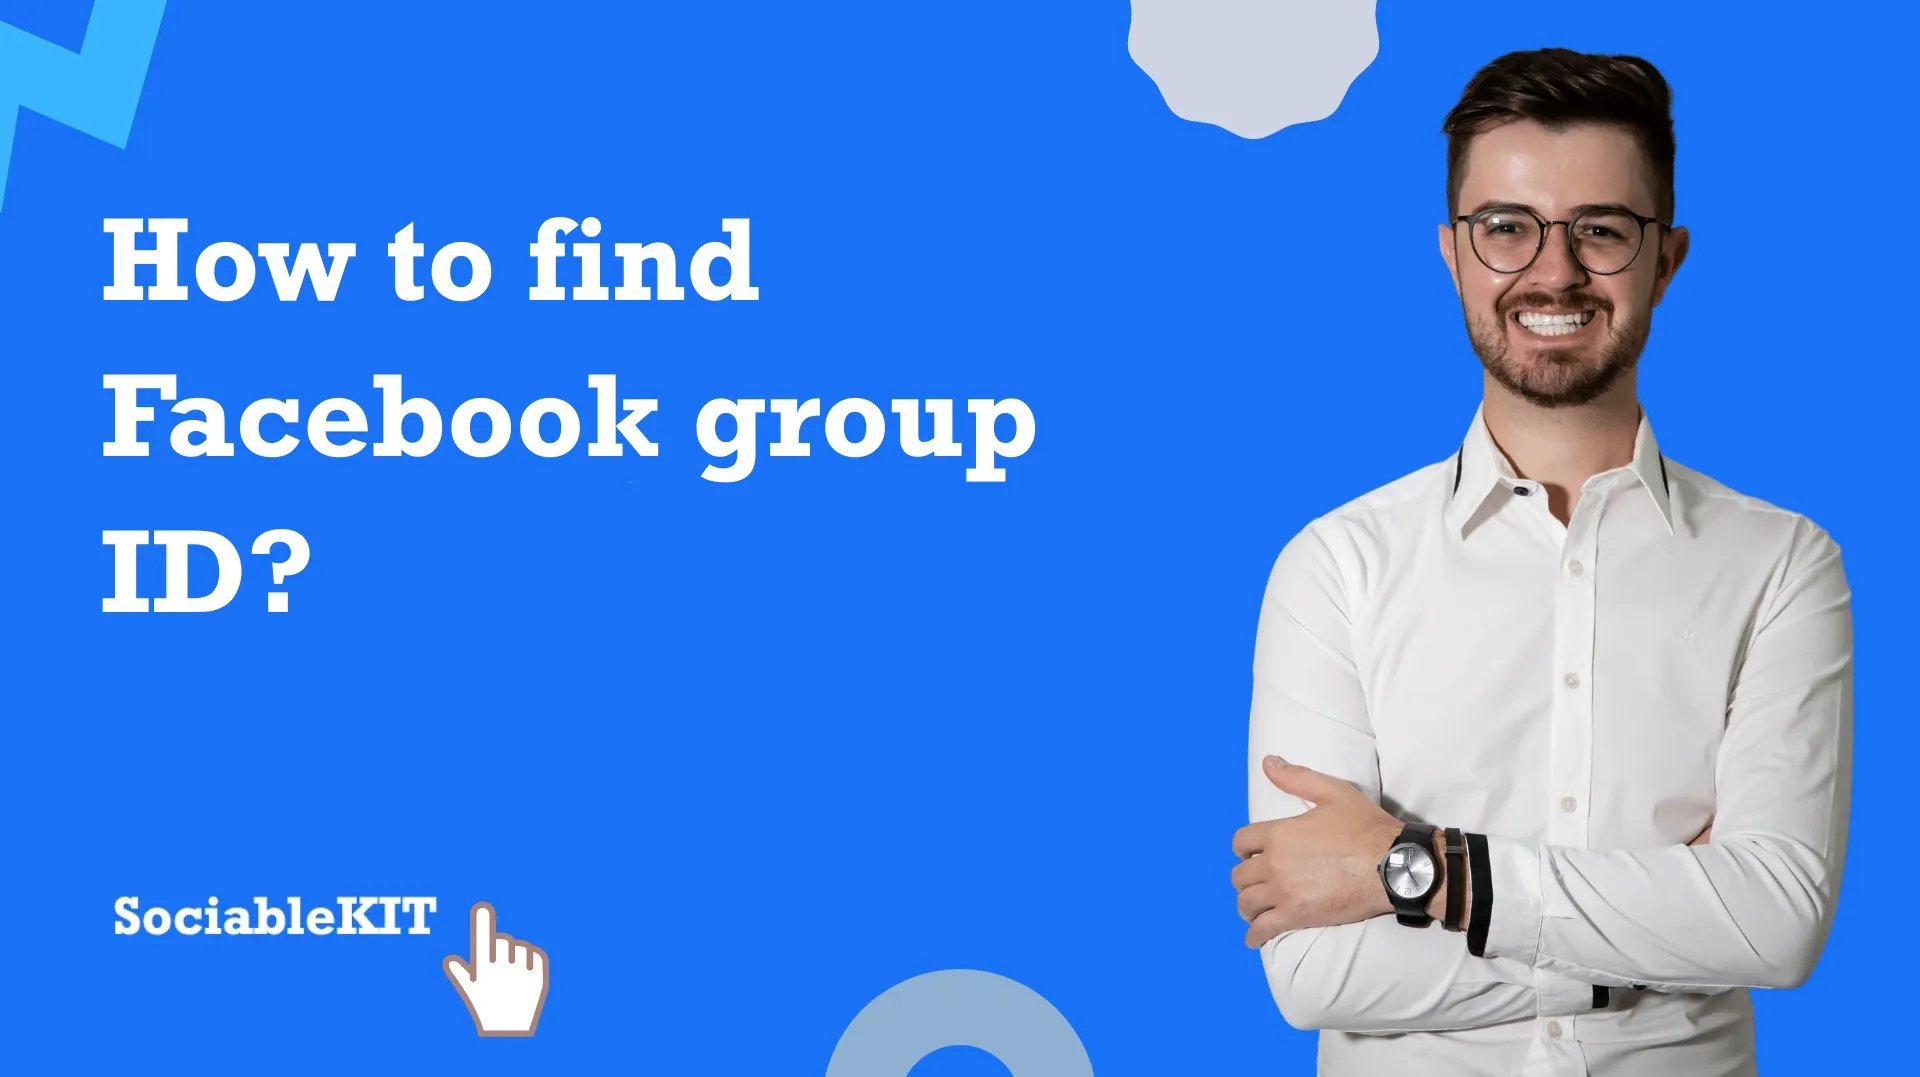 How to find Facebook group ID?